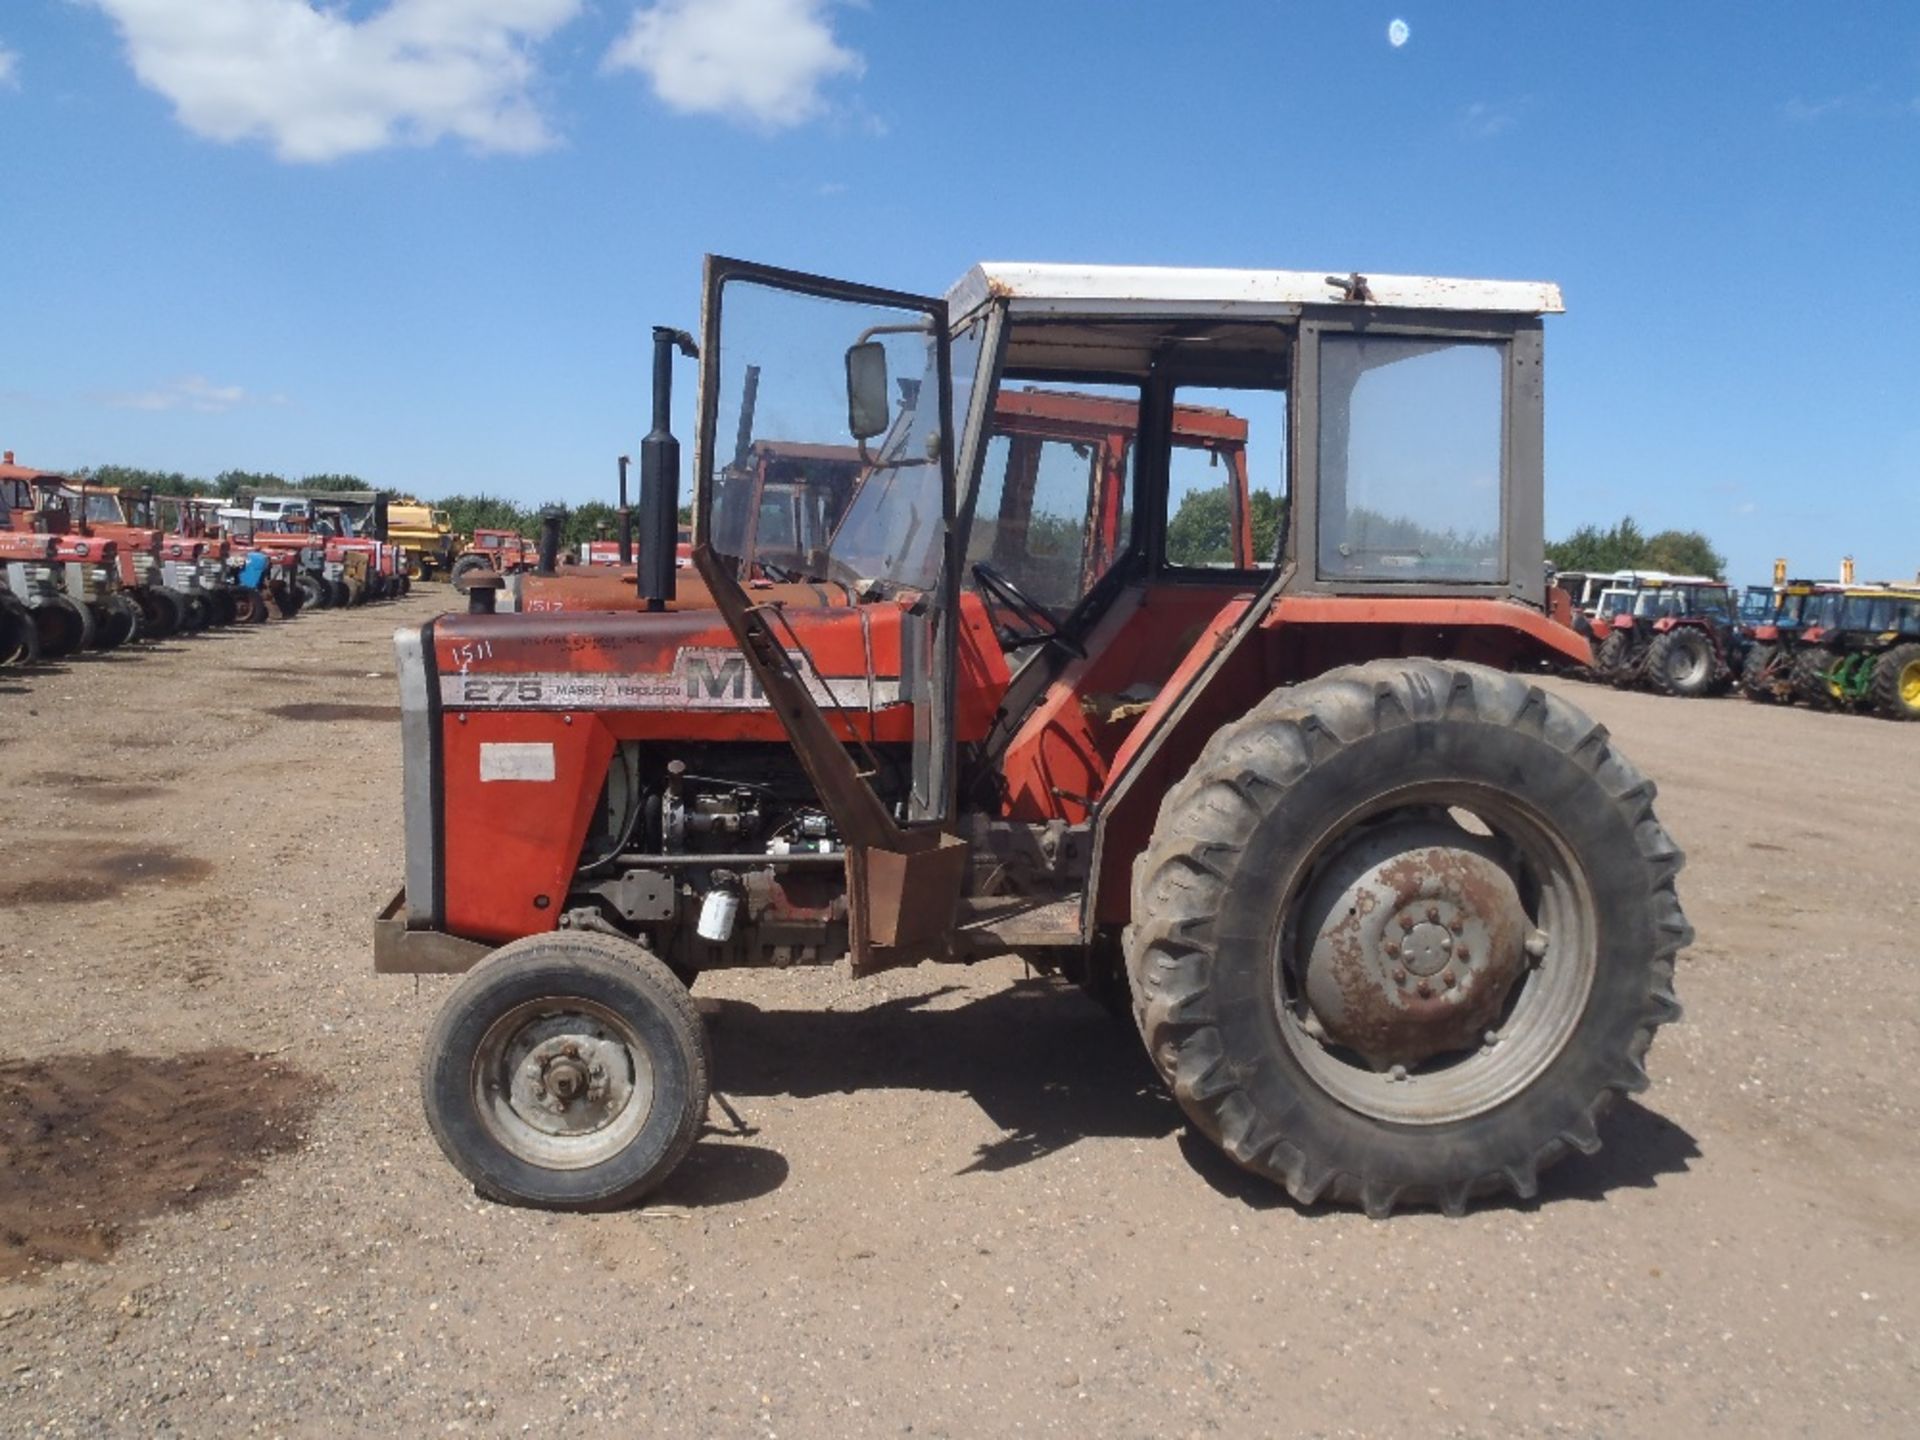 Massey Ferguson 275 Tractor with 8 Speed Gearbox, Wide Tyres and Power Steering. V5 will be supplied